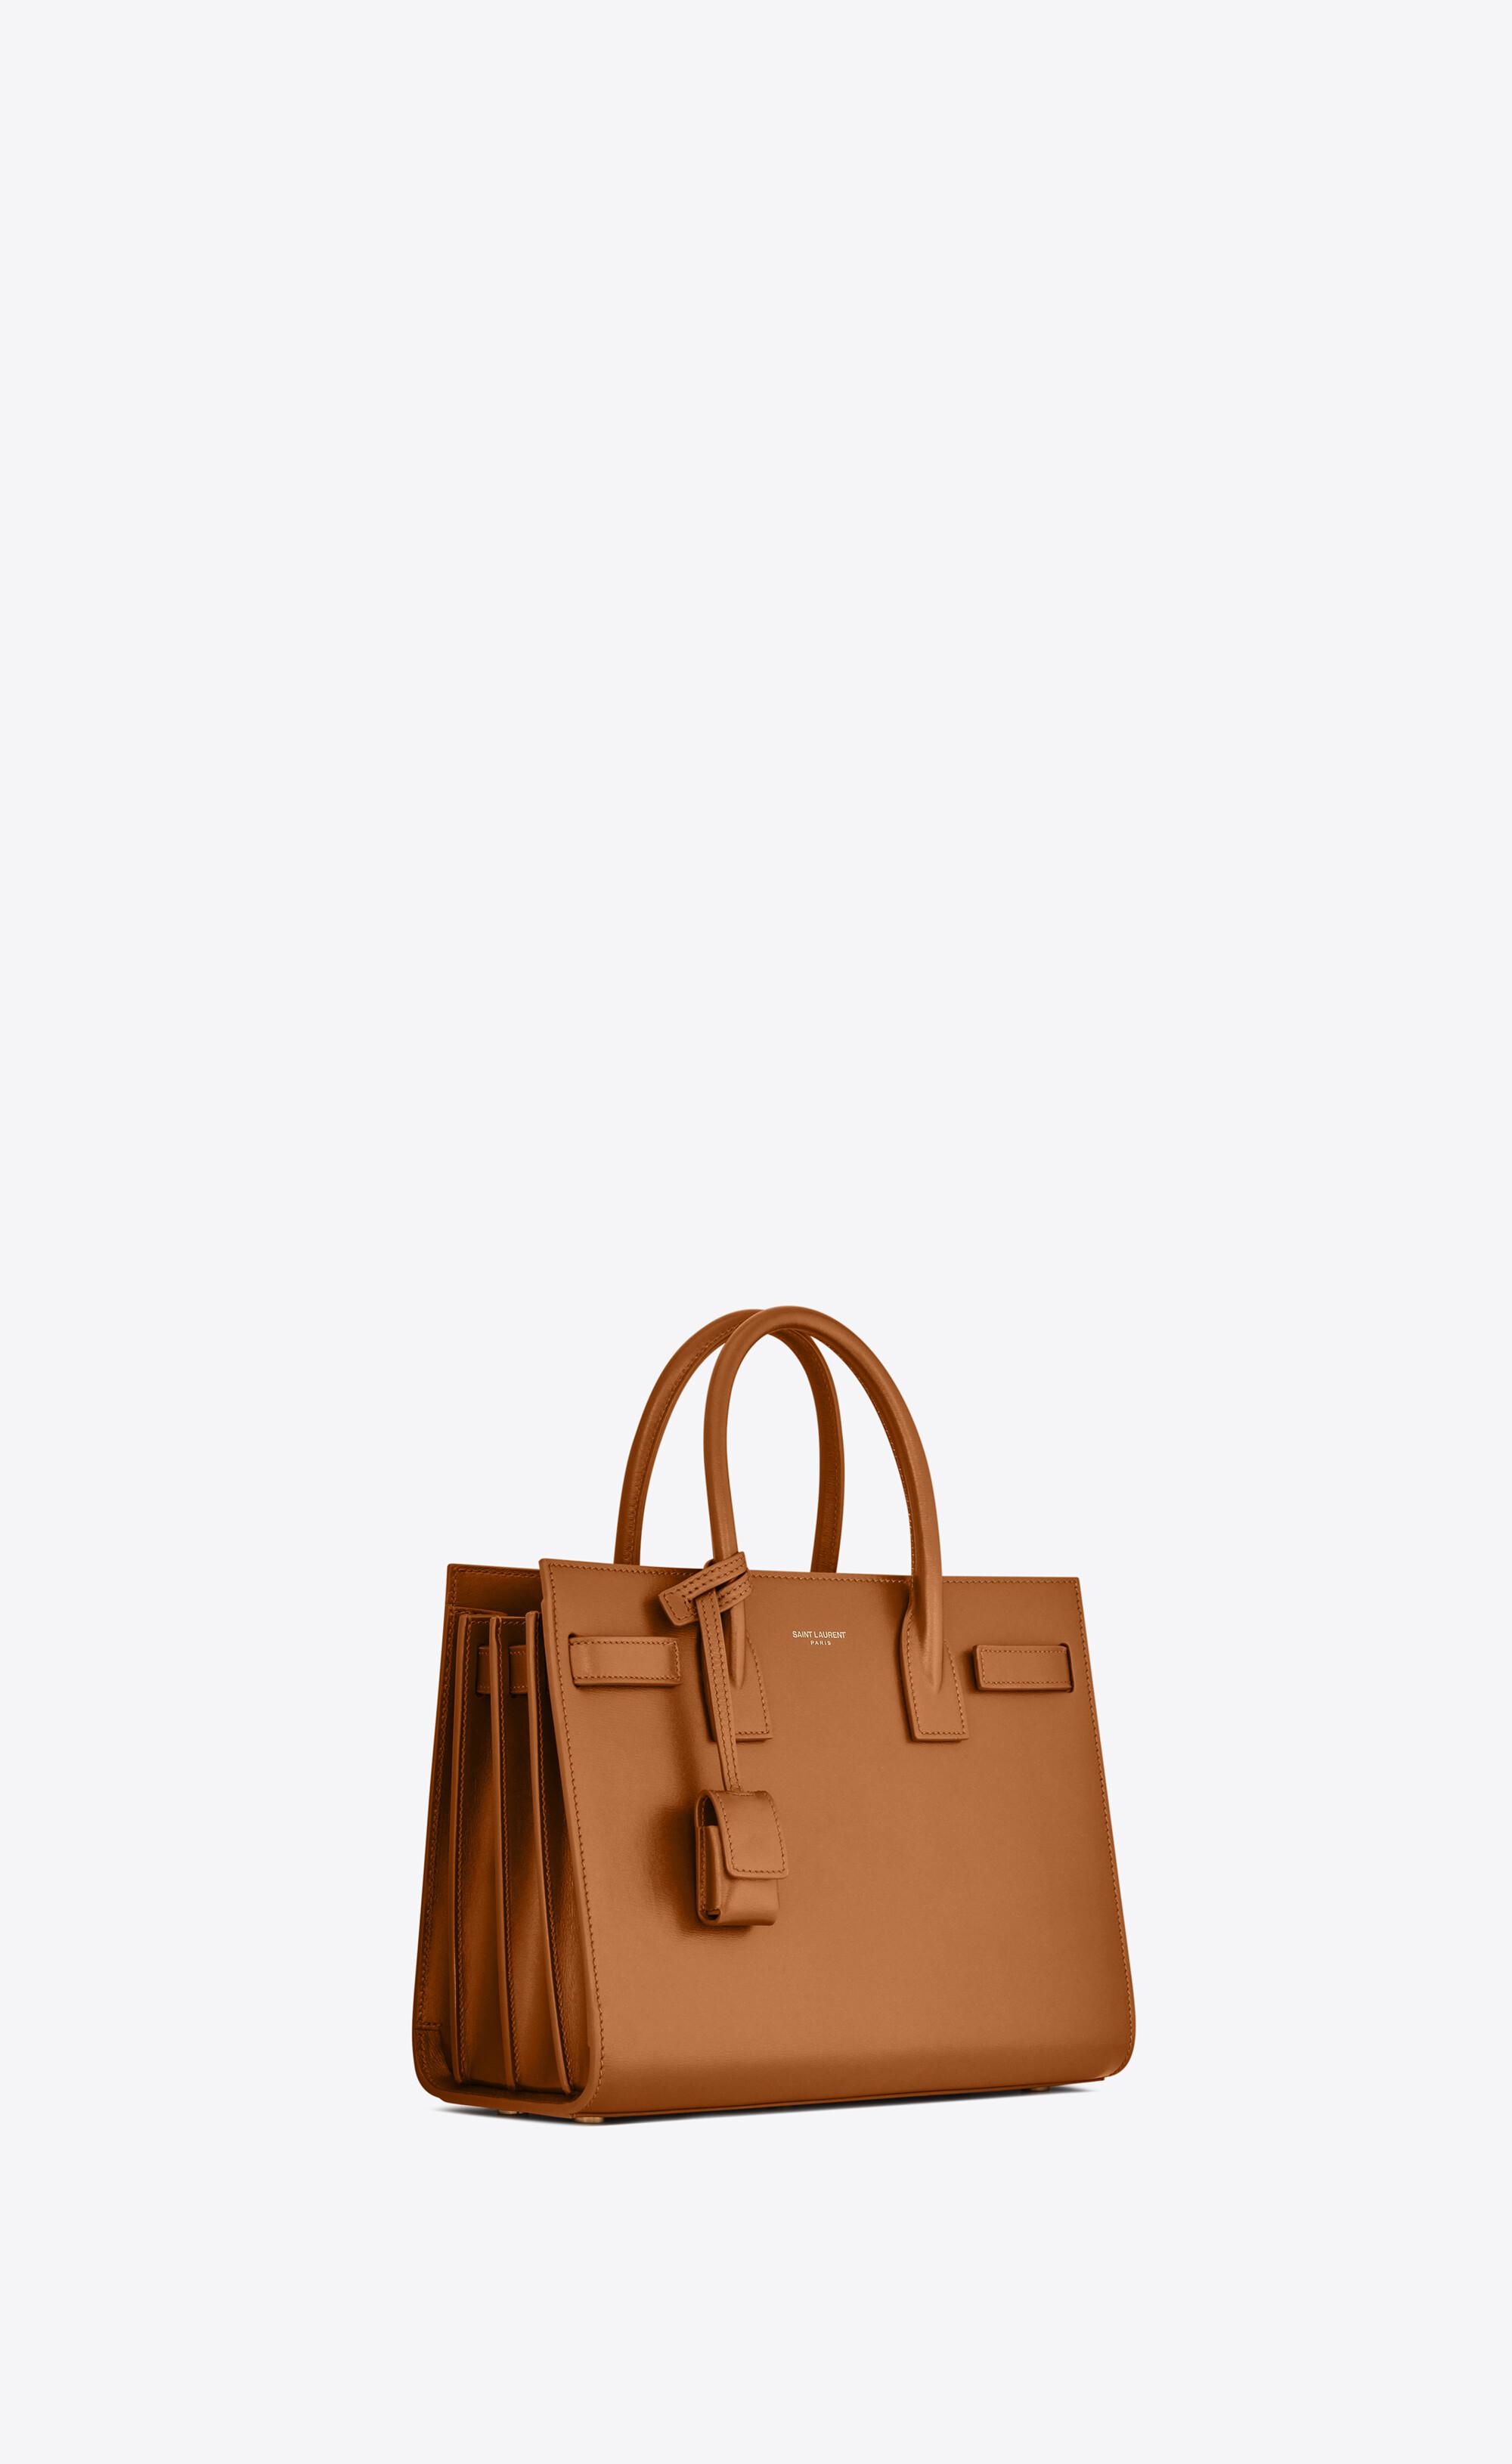 Saint Laurent Sac De Jour Baby In Smooth Leather | Lyst